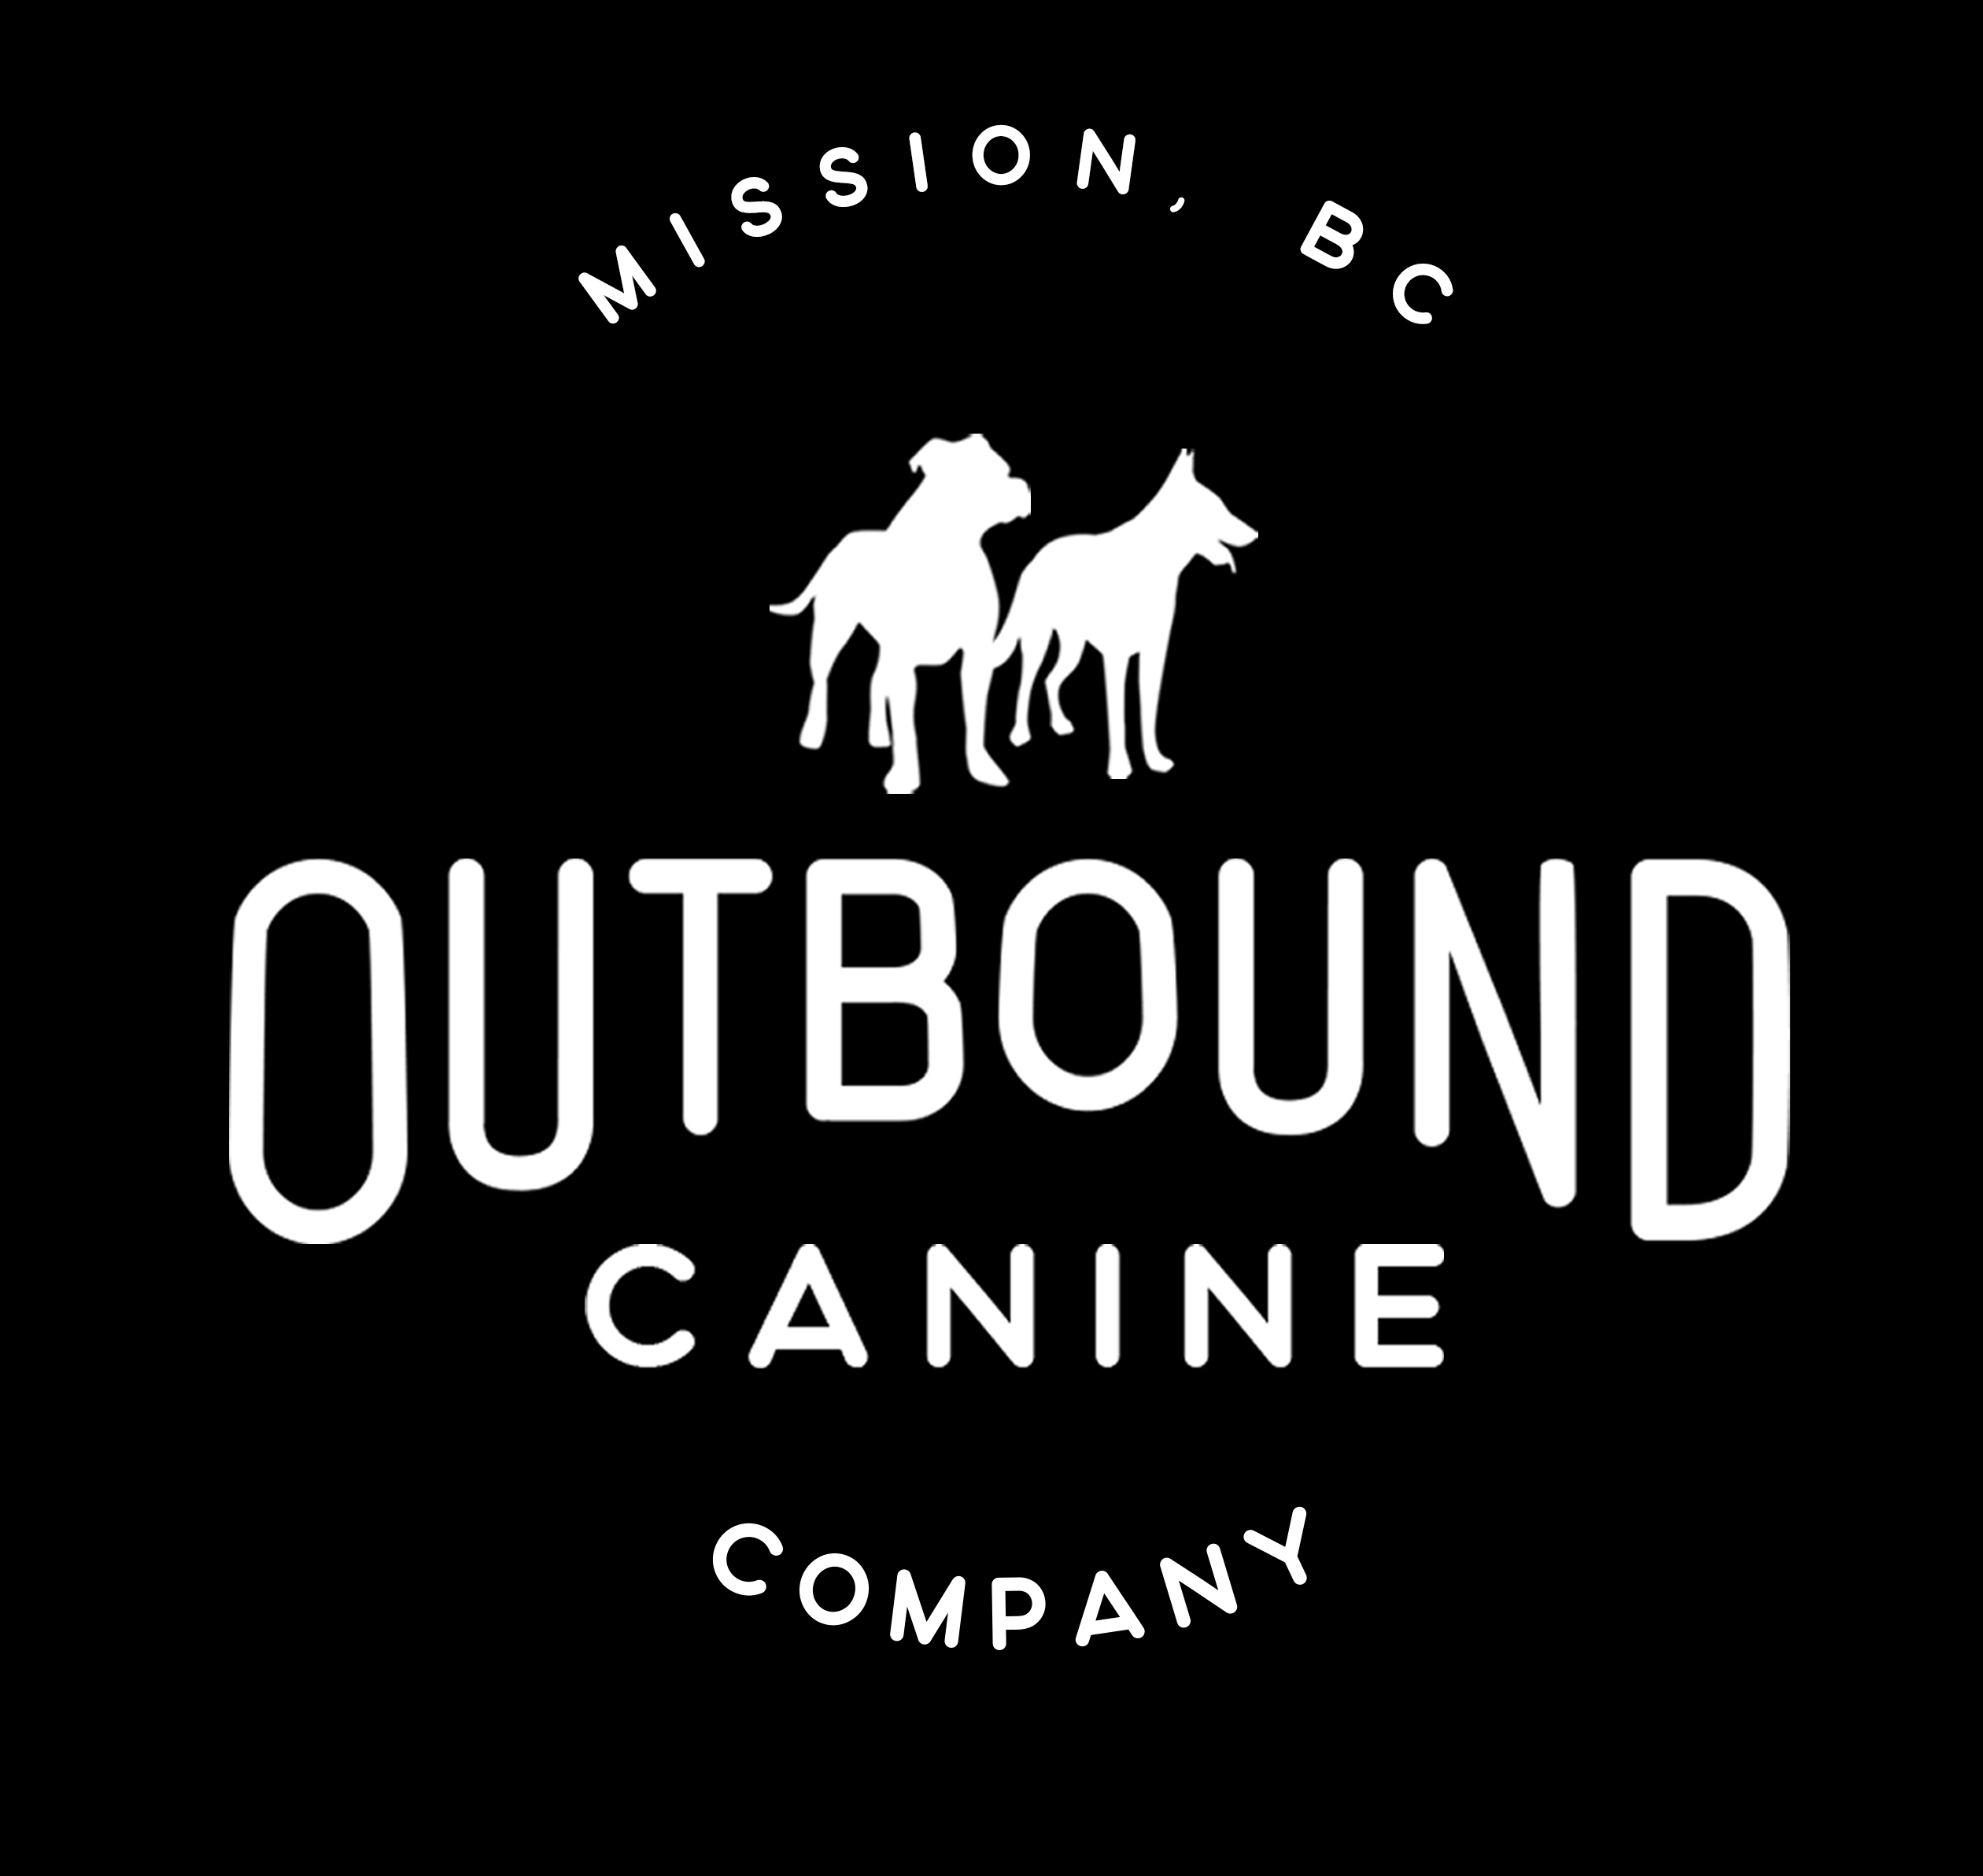 Gift Card to Outbound Canine Co a Small Business in Mission, BC Specializing in Biothane Dog Collars and Hands-Free Leashes